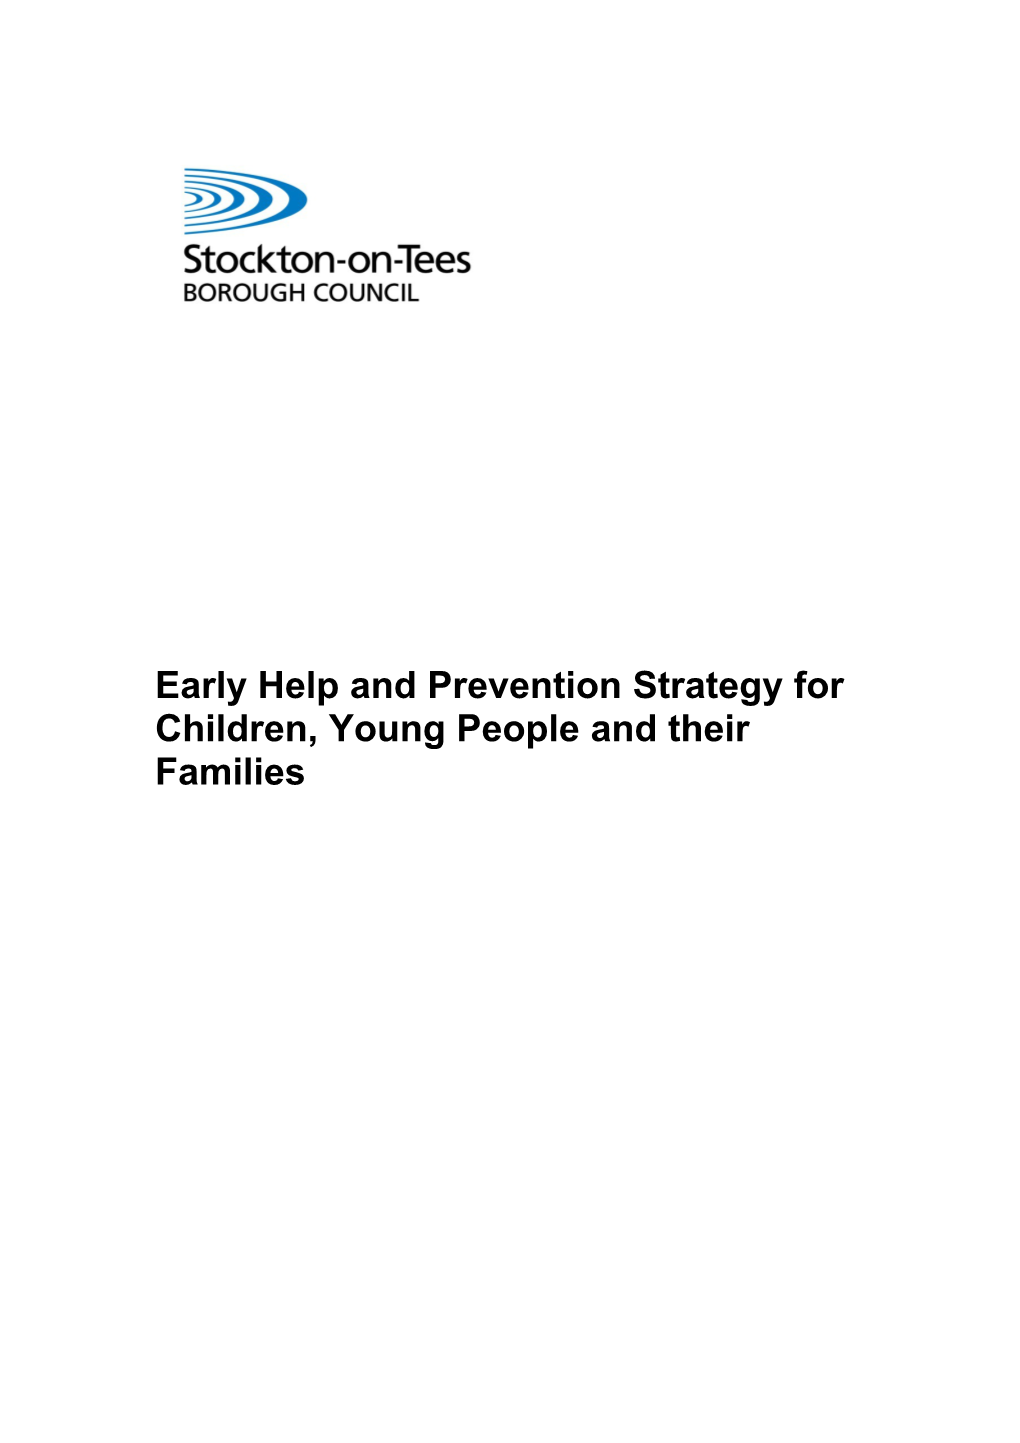 Early Help and Prevention Strategy for Children, Young People and Their Families